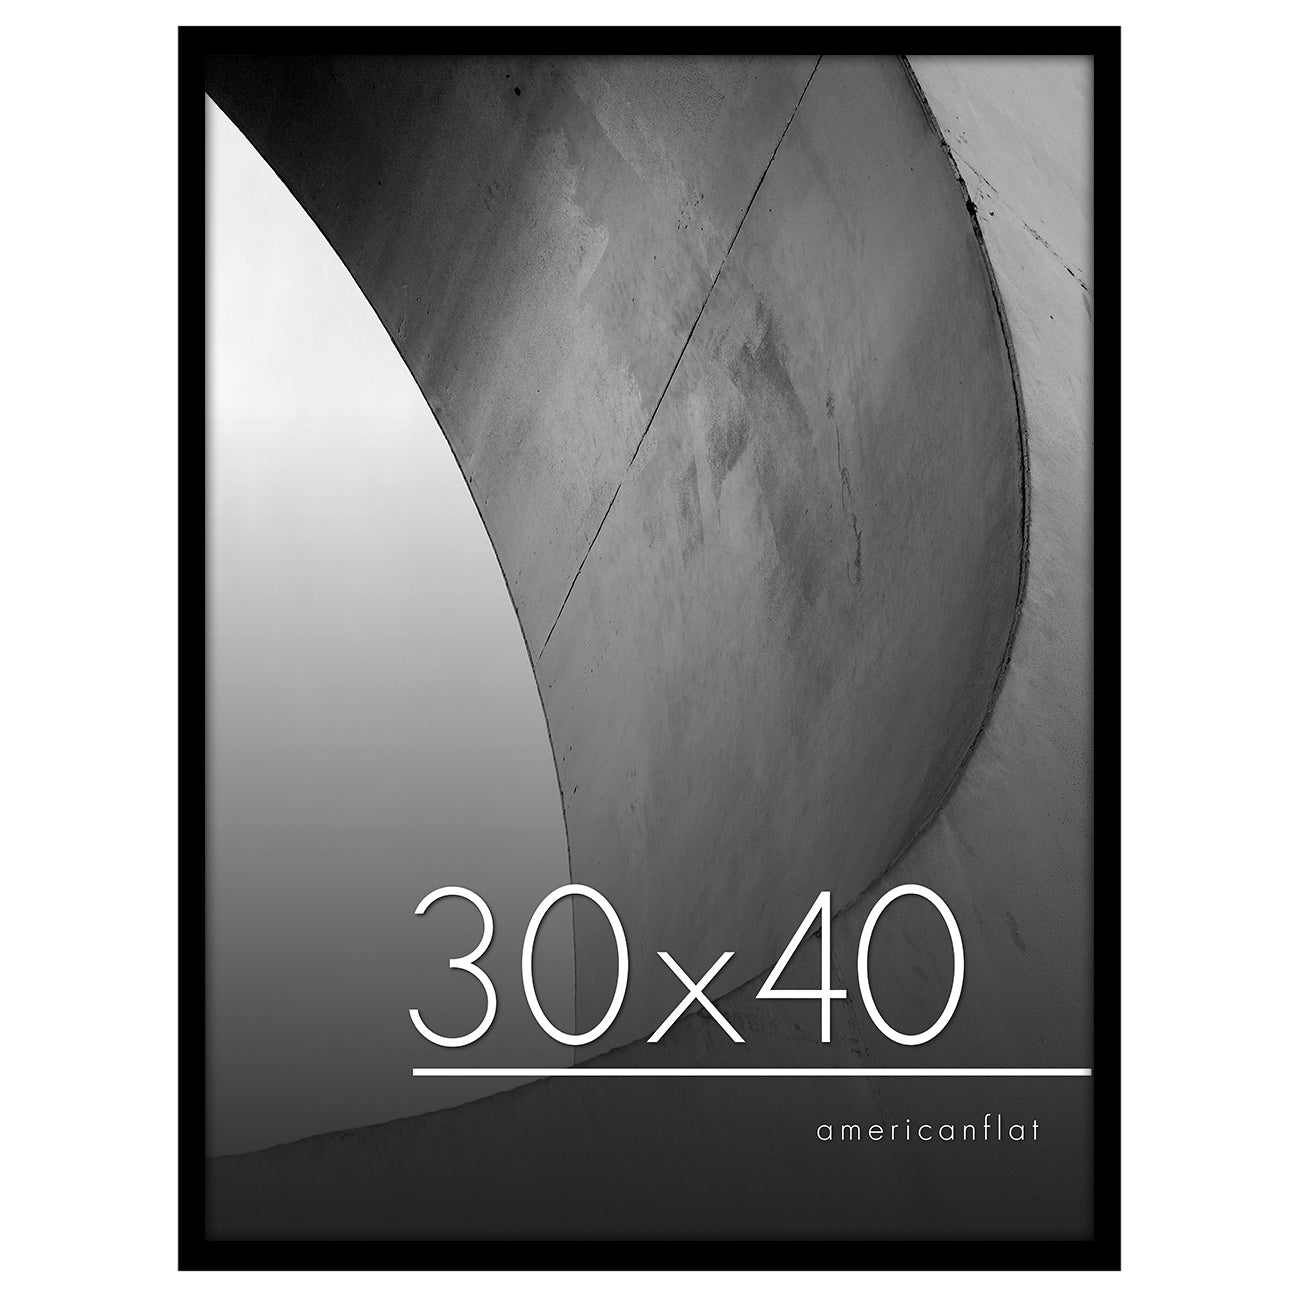 30x40 in Black - Wall with Hanging Hardware Included for Horizontal or Vertical Display Format - Picture Frame